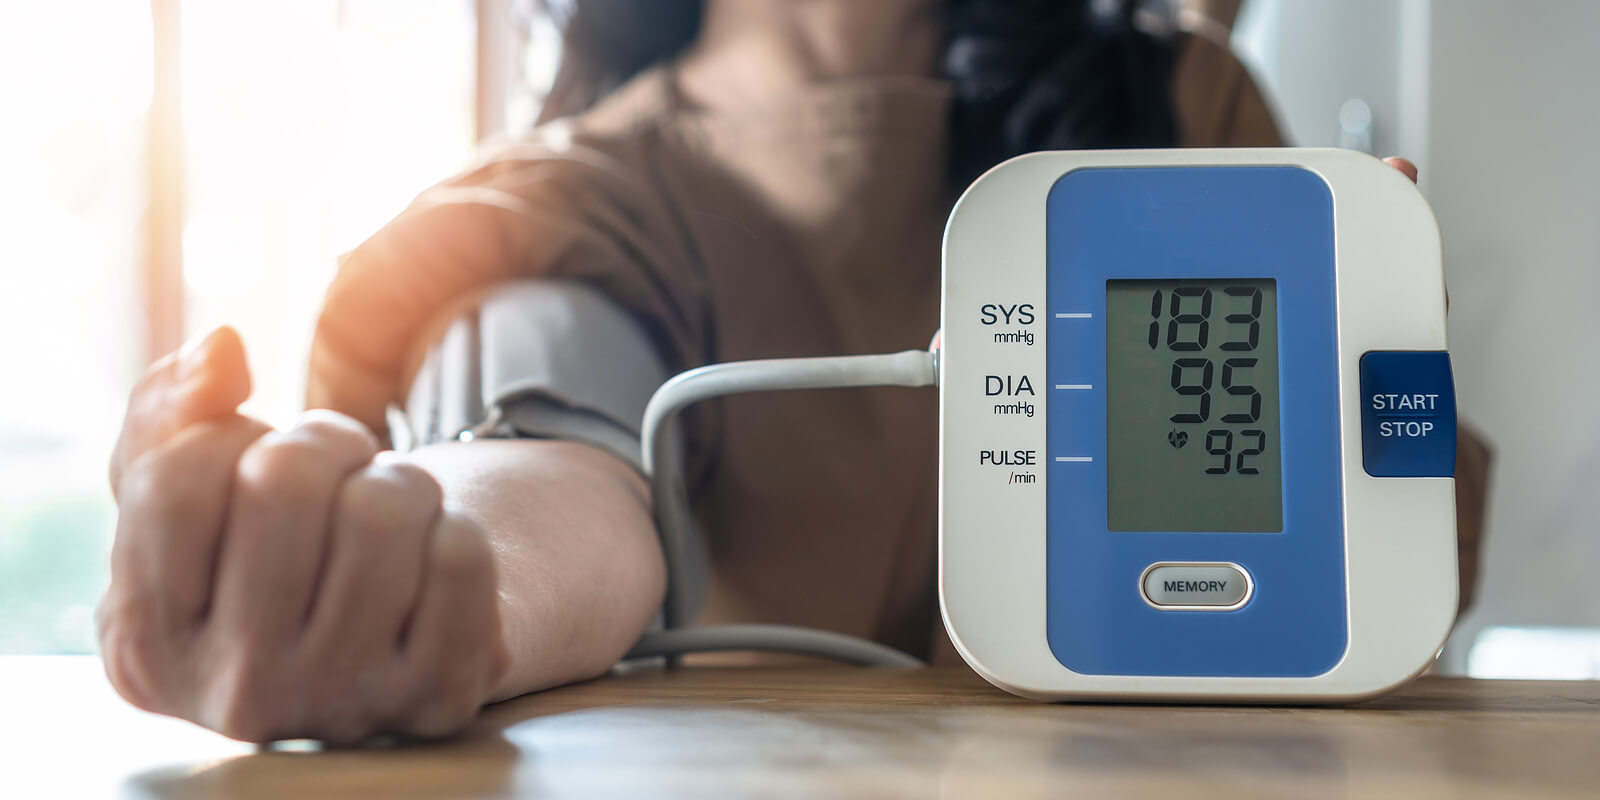 Measuring blood pressure at home is beneficial